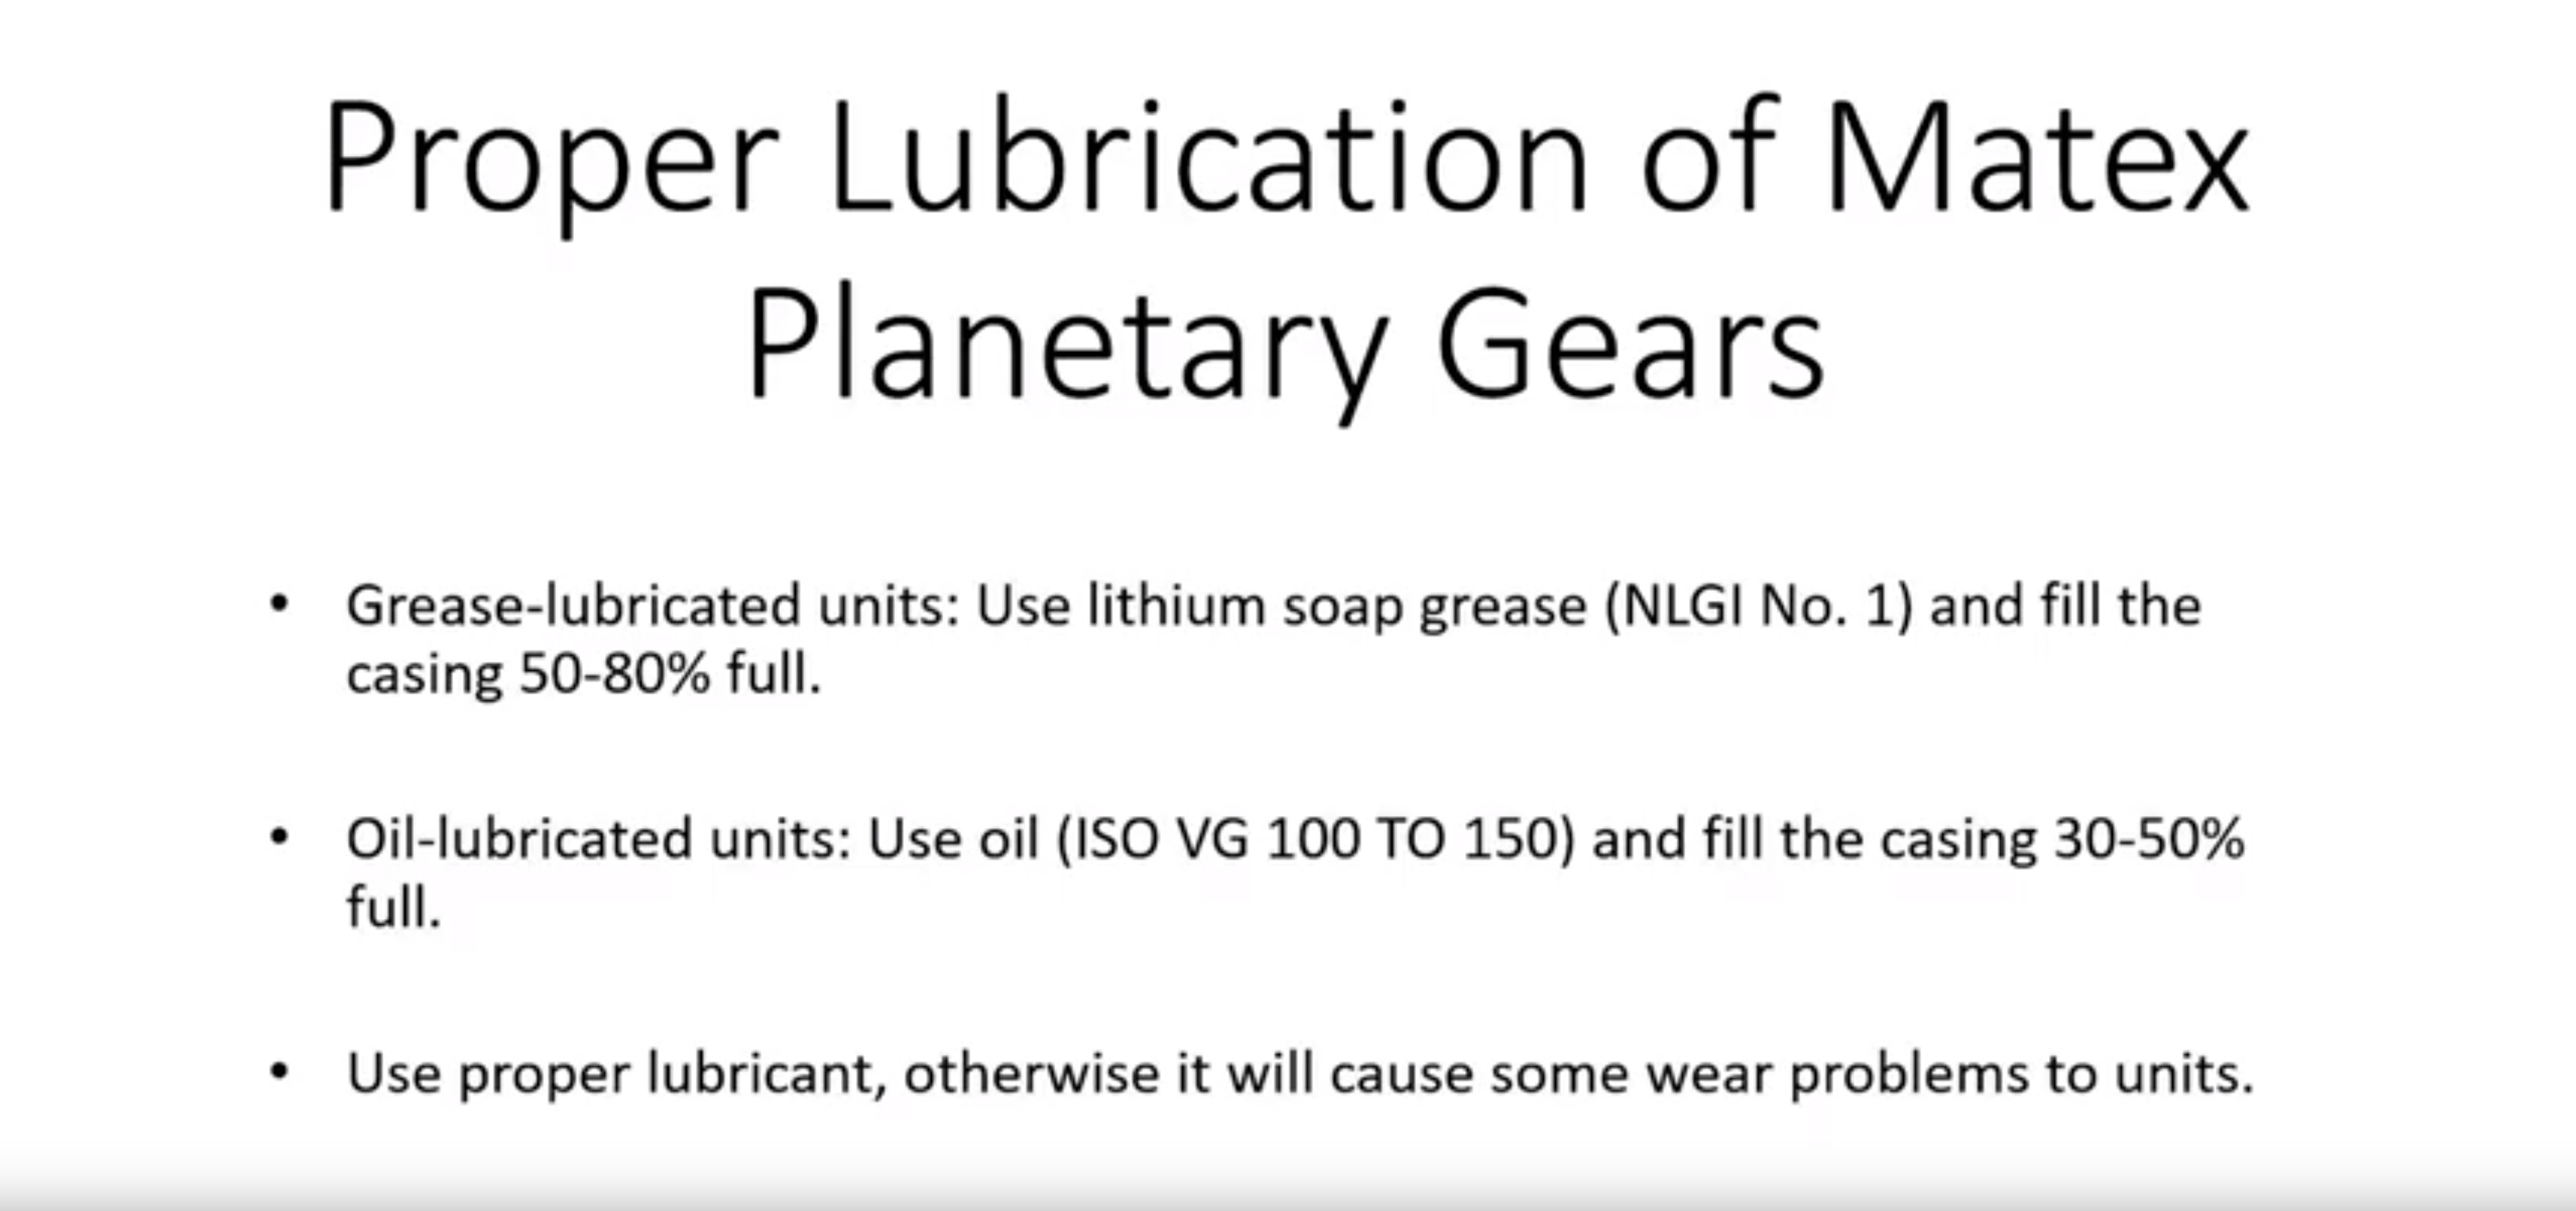 How to Properly Lubricate Your Planetary Gears